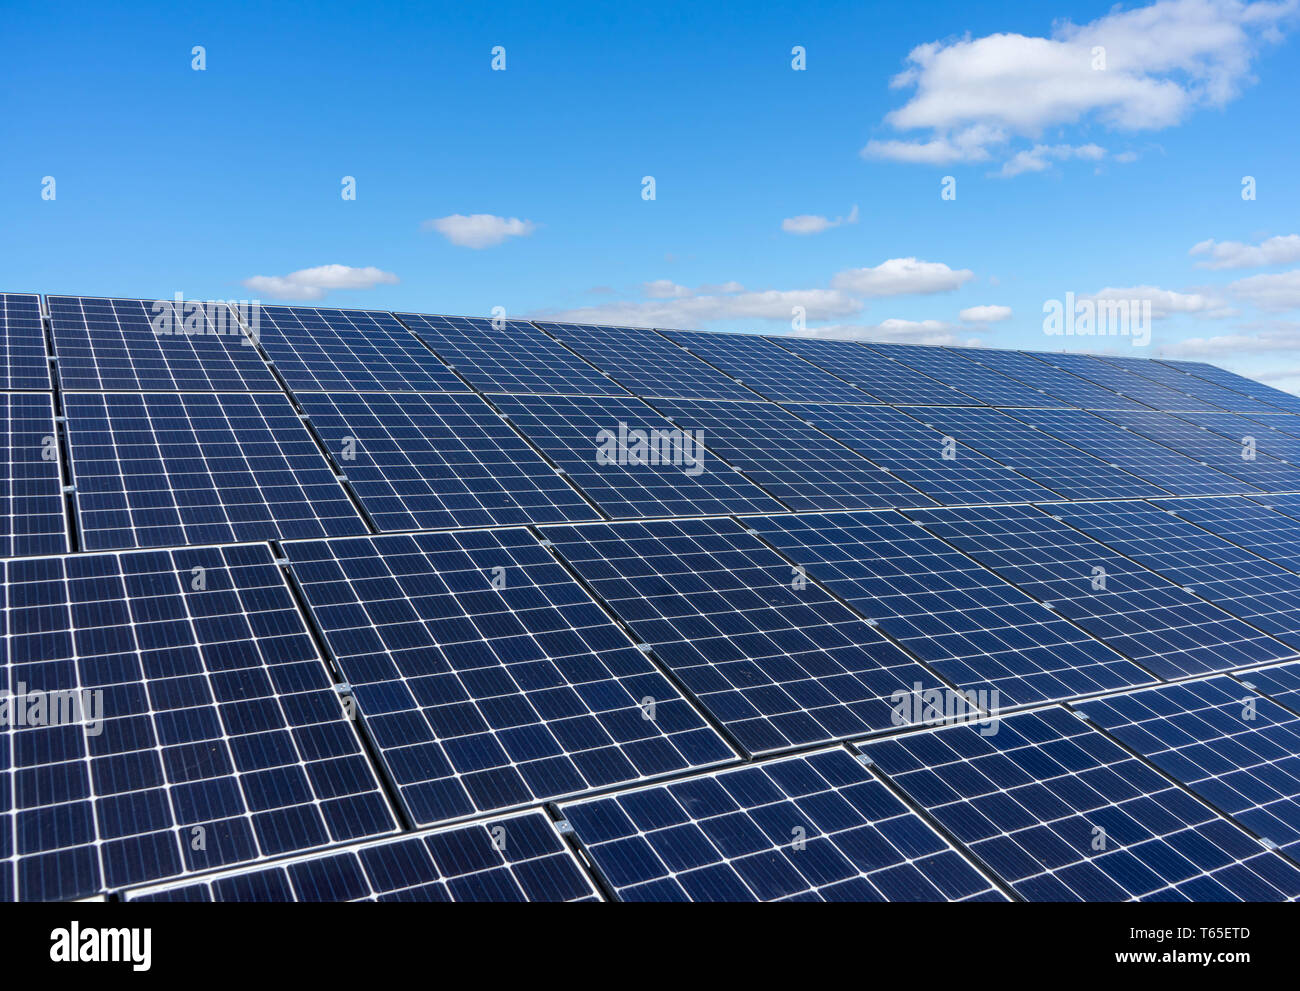 Solar panels on a roof with a blue sky and white clouds background Stock Photo